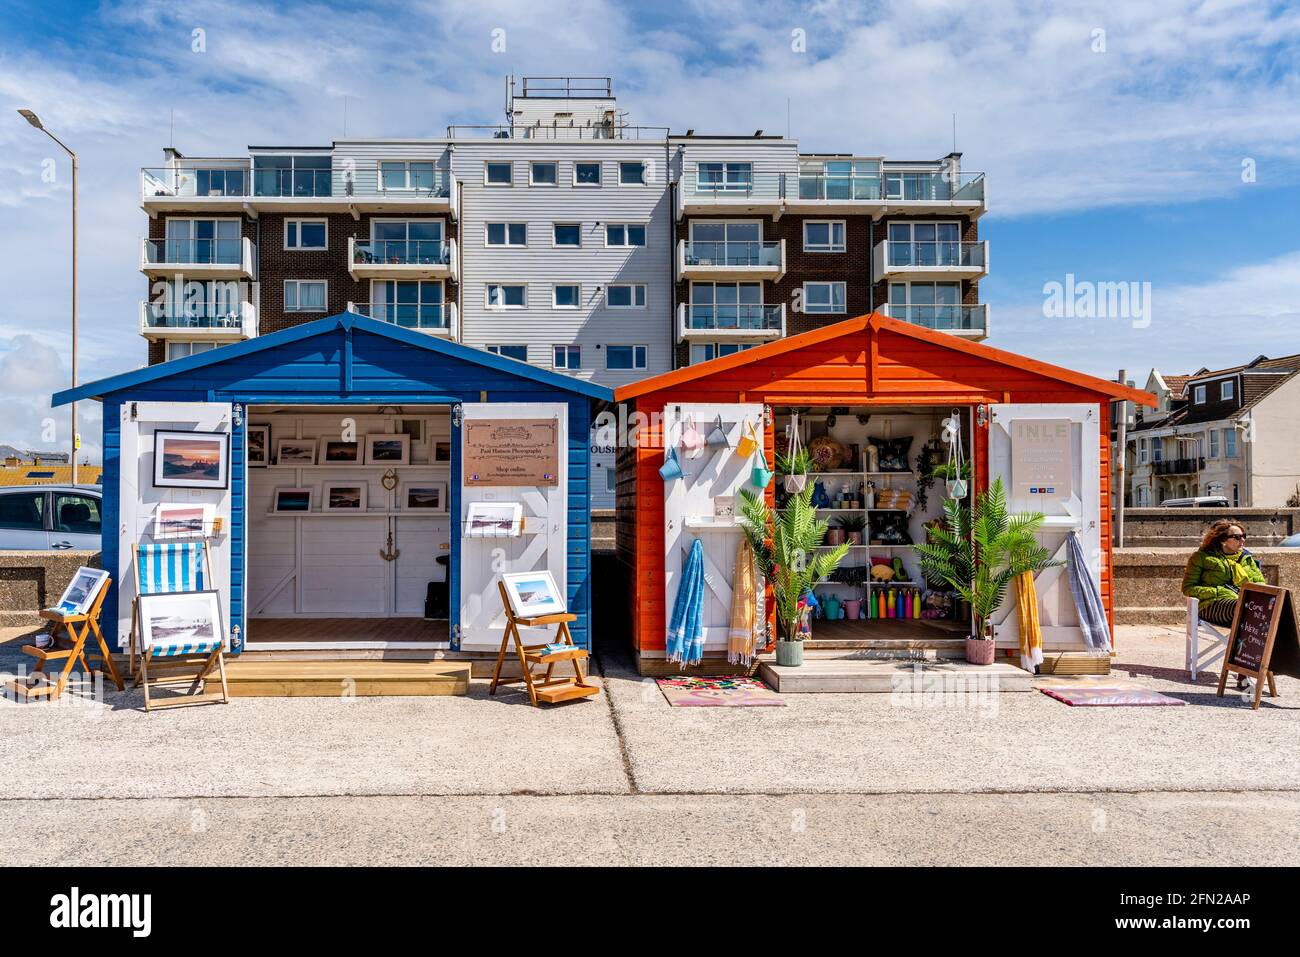 Colourful ‘Beach Hut’ Shops On The Seafront, Seaford, East Sussex, UK. Stock Photo